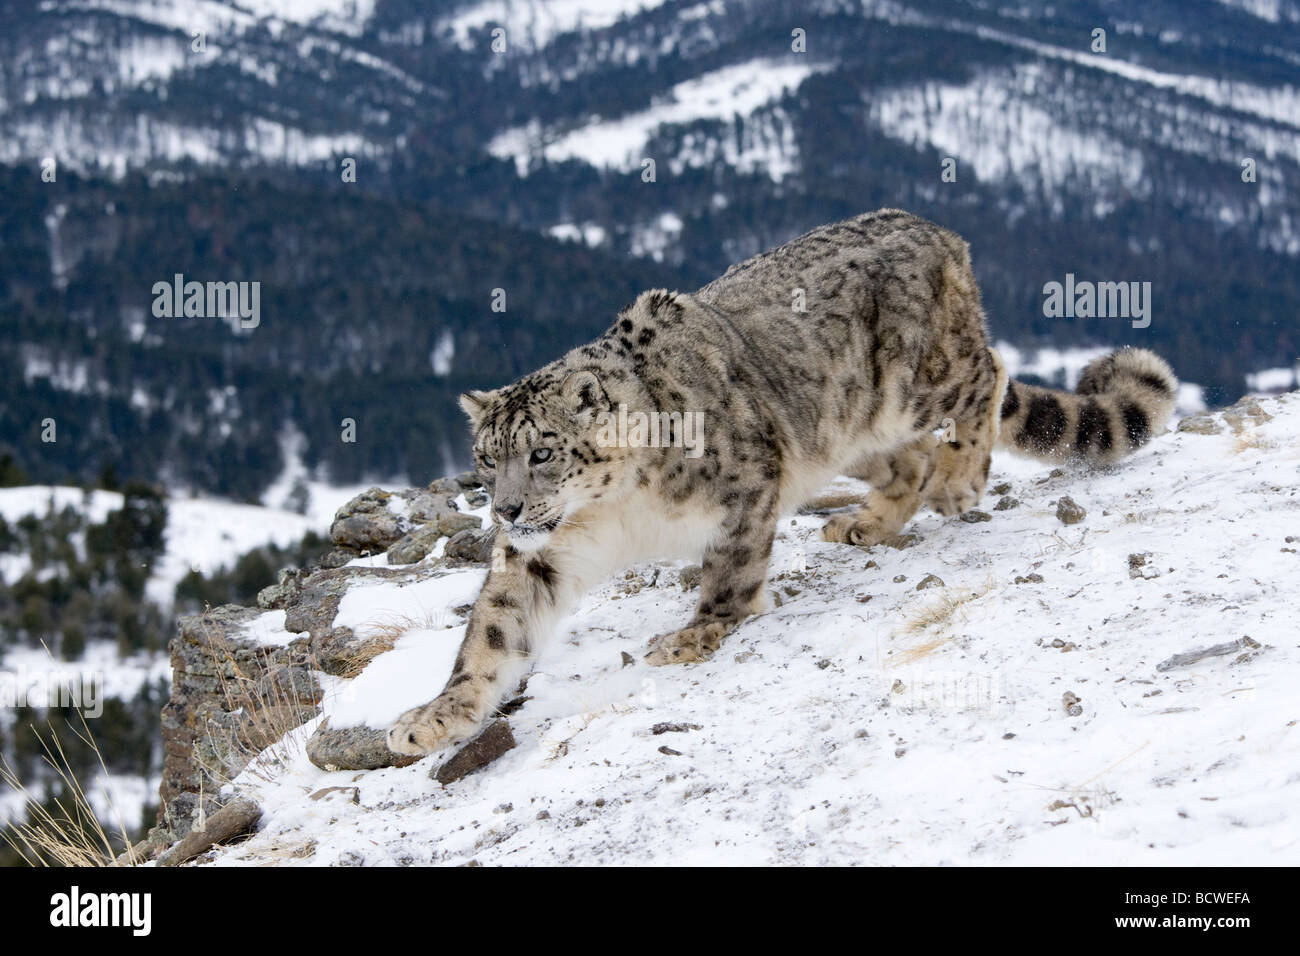 Snow Leopard (Panthera uncia) walking in snow Banque D'Images